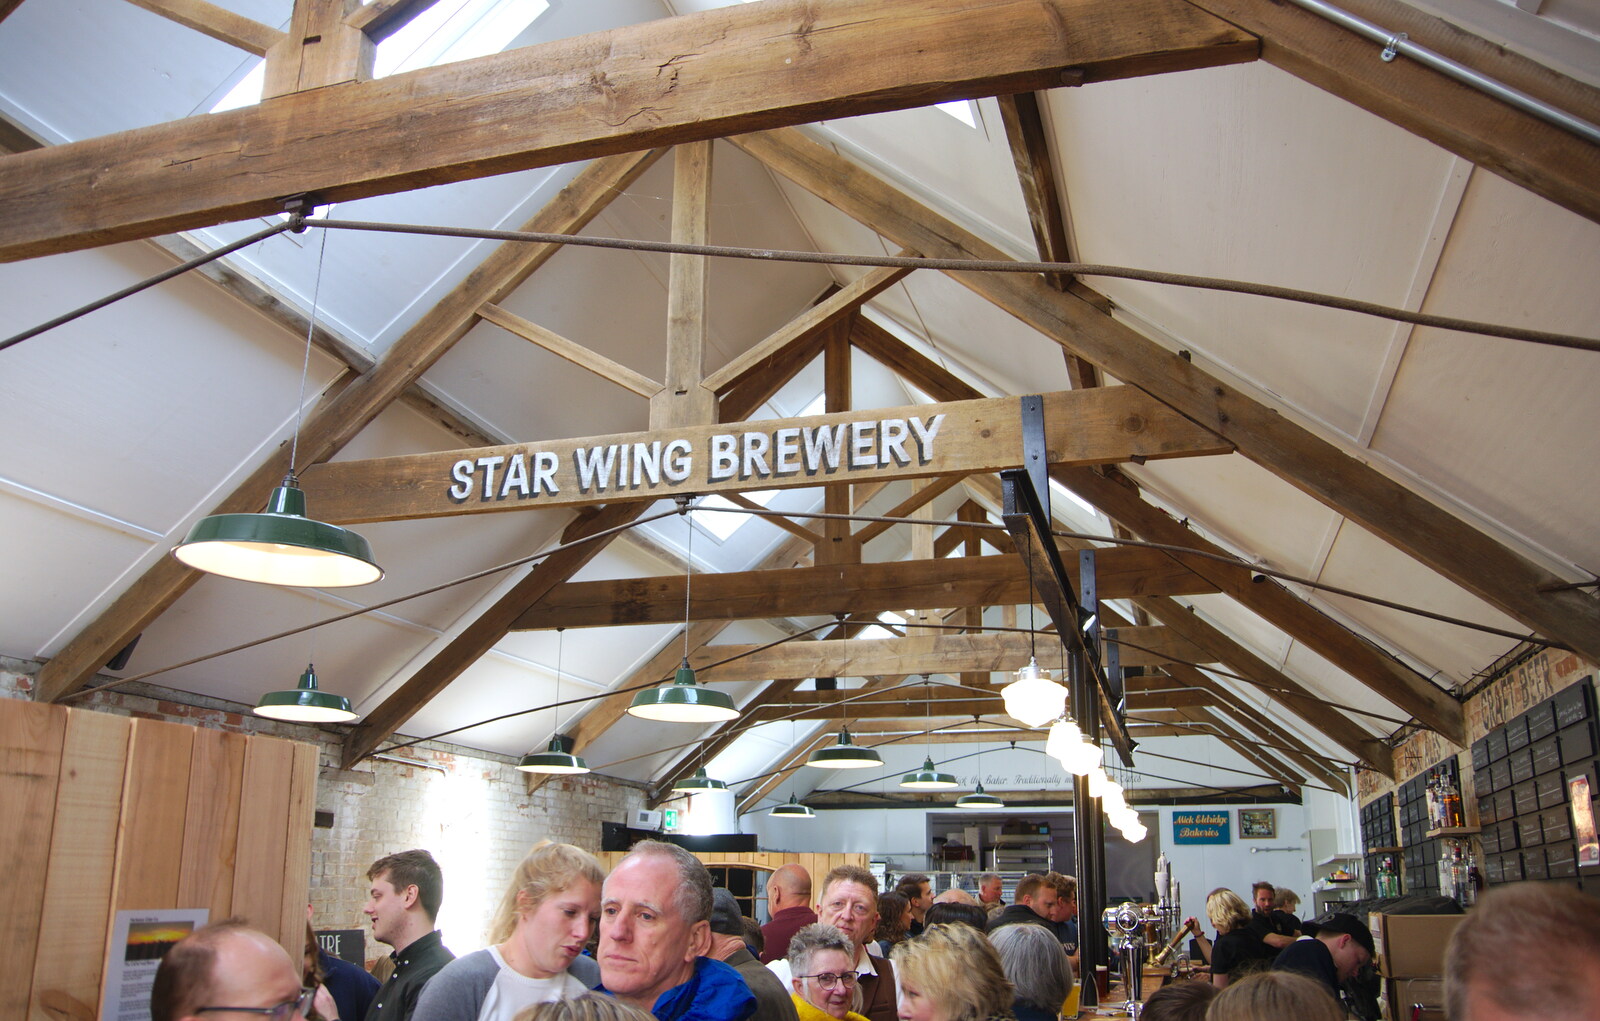 The new Star Wing Brewery tap room from The Opening of Star Wing Brewery's Tap Room, Redgrave, Suffolk - 4th May 2019